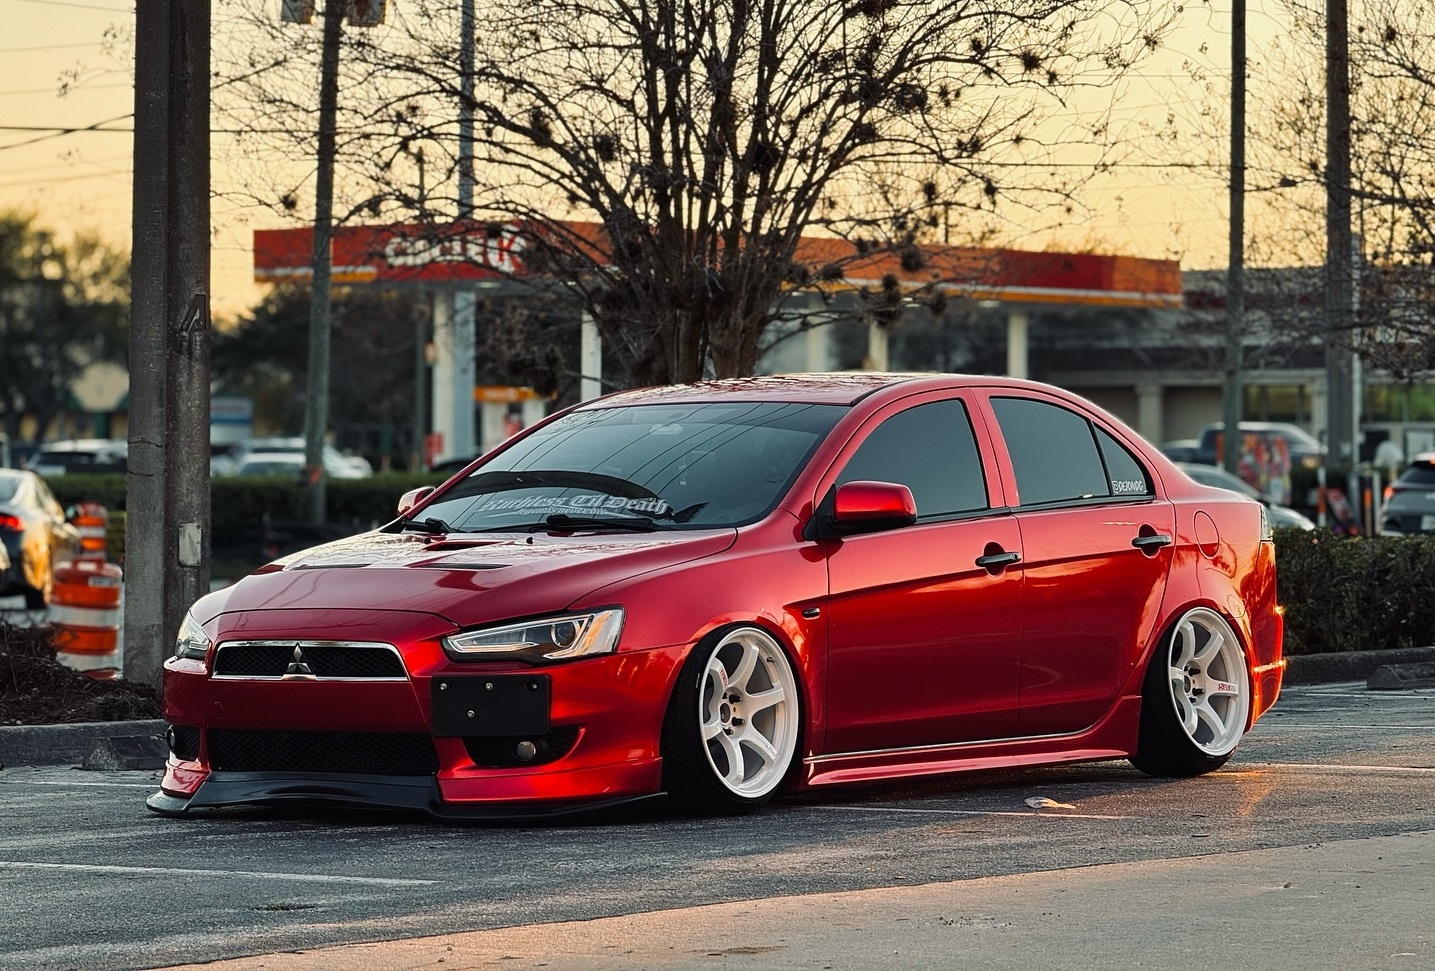 Stanced Lancer GTS on airbags